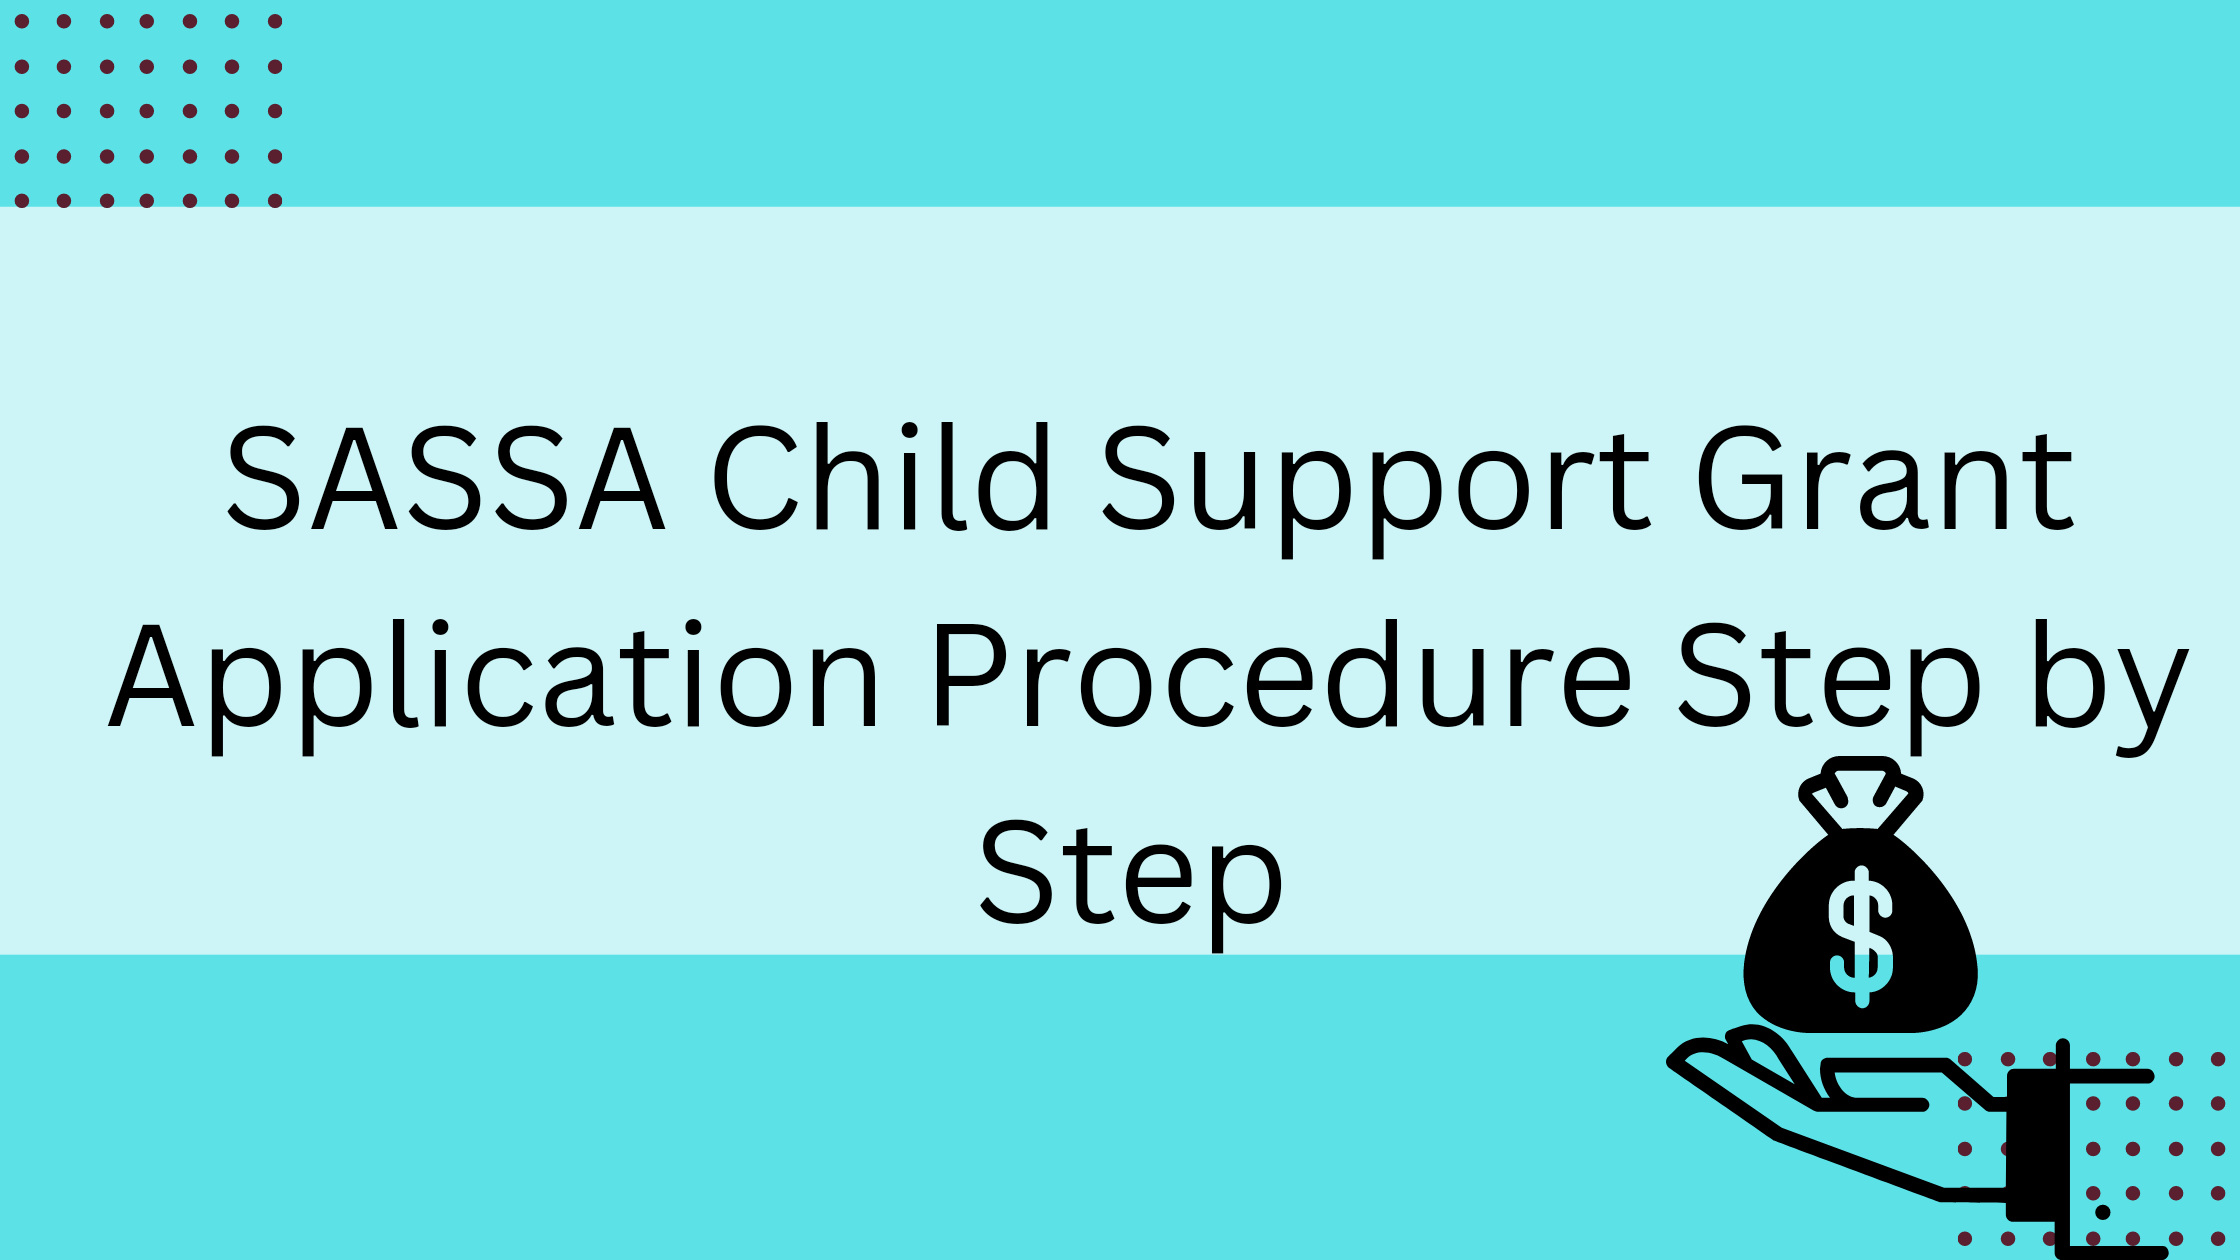 SASSA Child Support Grant Application Procedure Step by Step